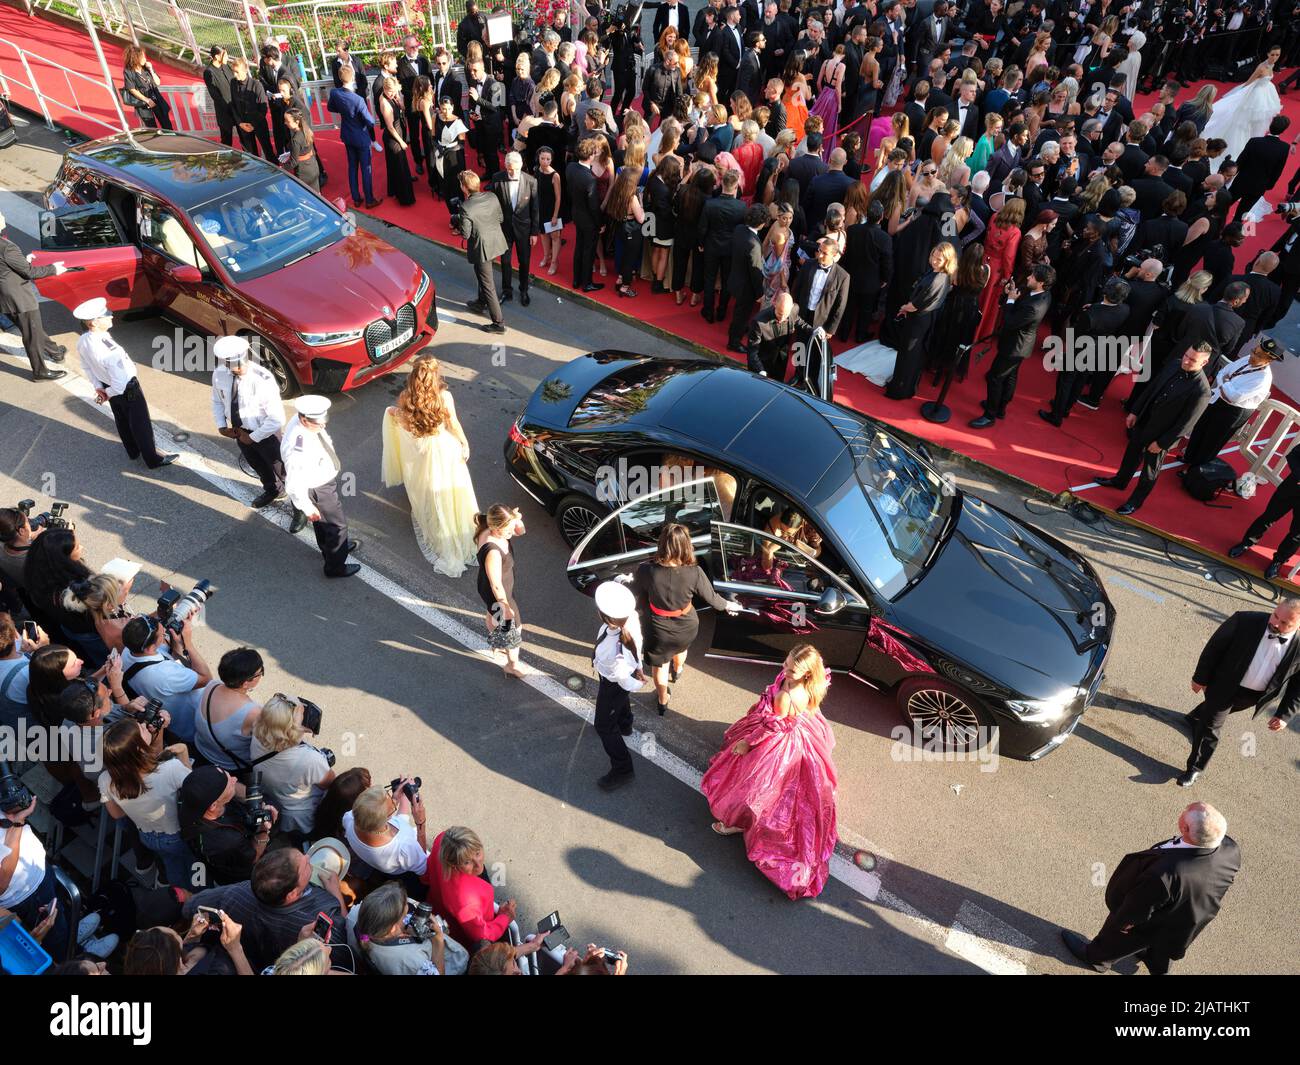 AERIAL VIEW from a 6-meter mast. Arrival of the movie industry people at the red carpet of the Palais des Festivals in Cannes. French Riviera, France. Stock Photo